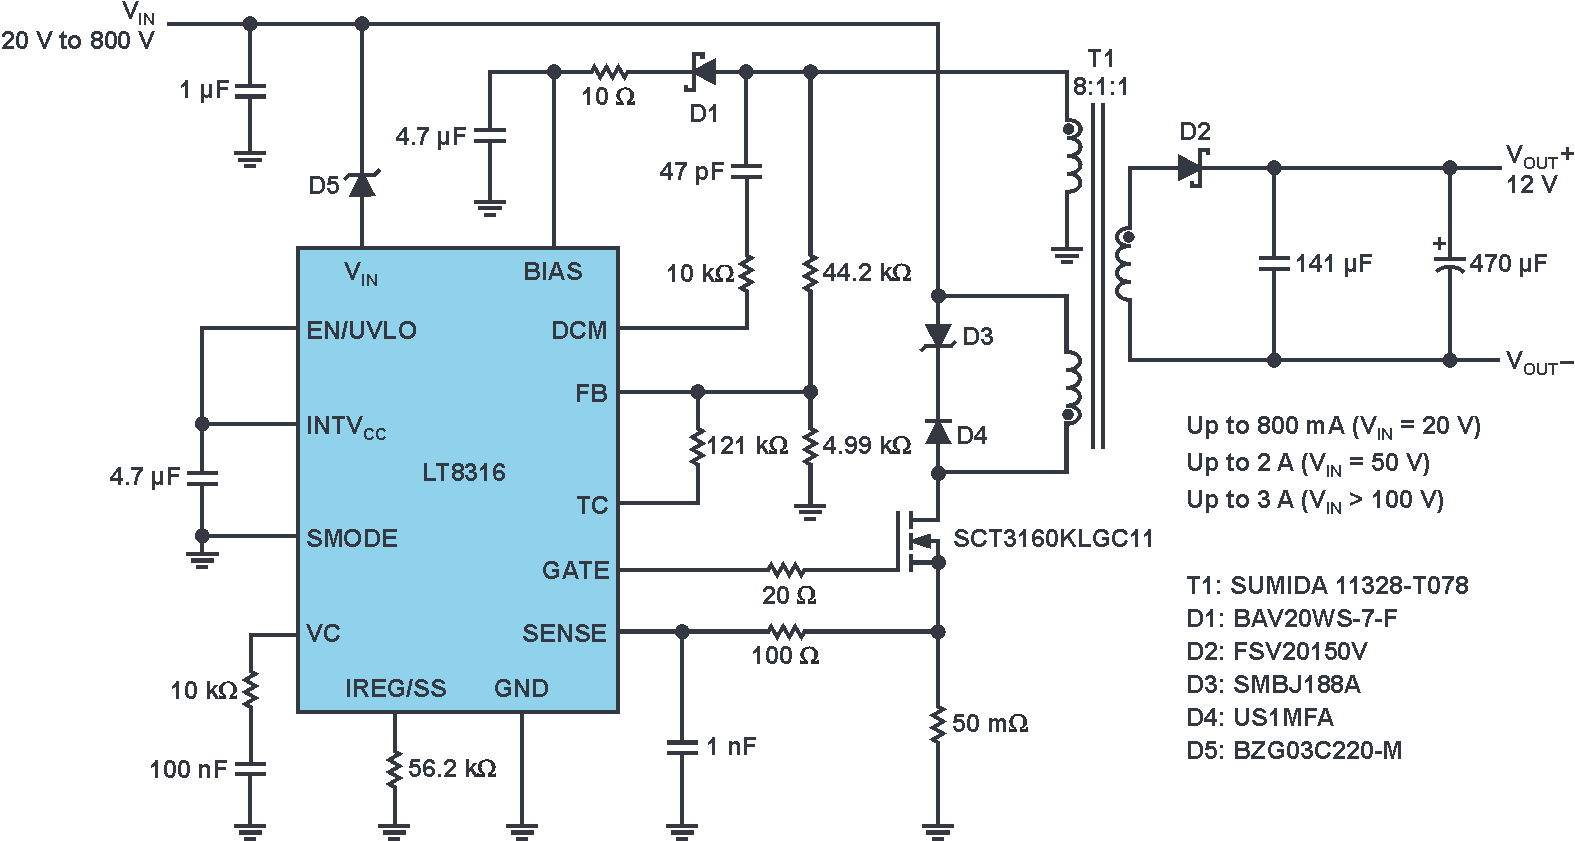 A complete 12 V isolated flyback converter for a wide input from 20 V to 800 V with a minimum start-up voltage of 260 V.